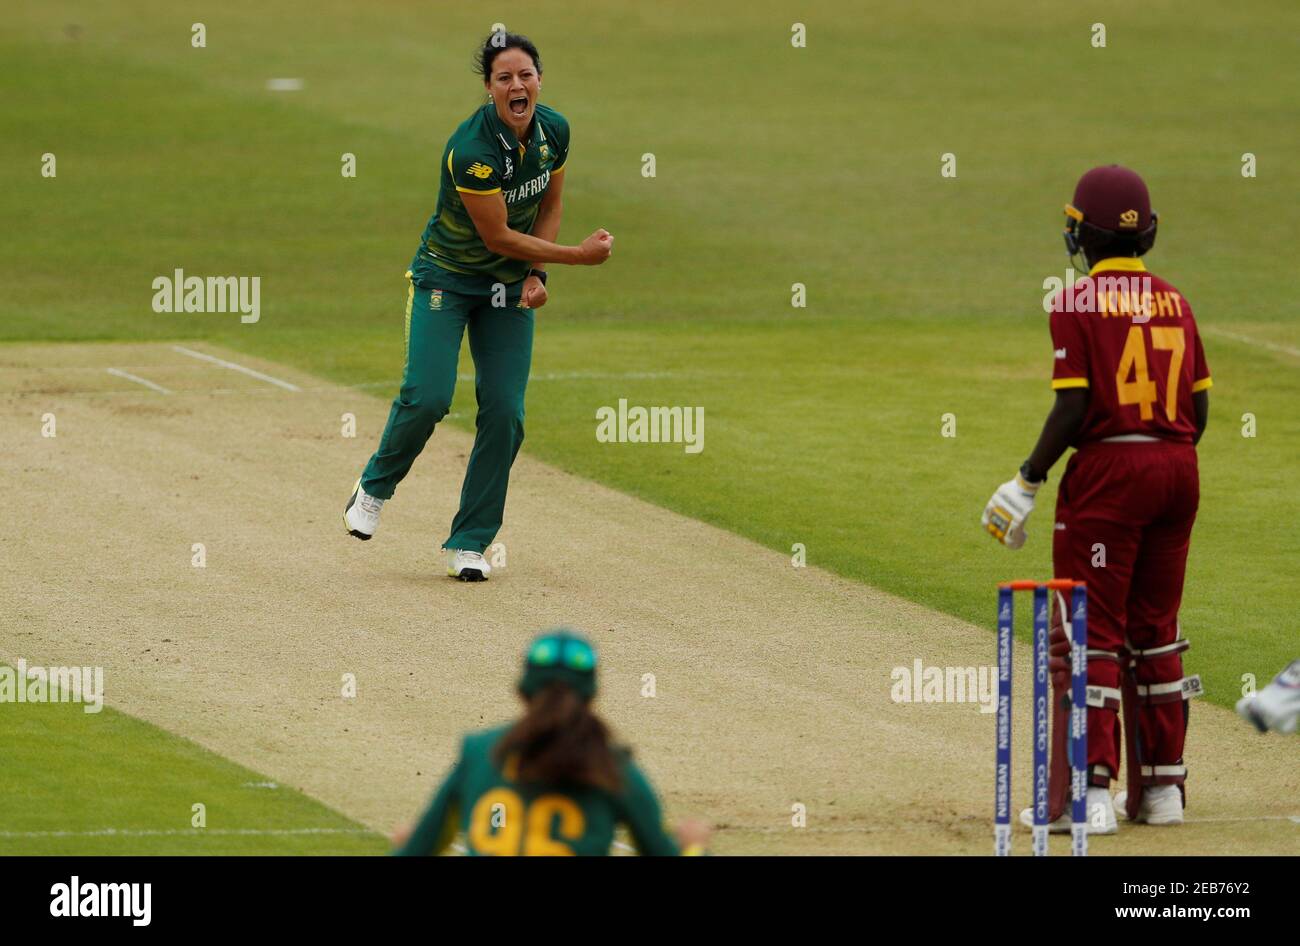 Cricket - South Africa vs West Indies - Women's Cricket World Cup - Leicester, Britain - July 2, 2017   South Africa's Marizanne Kapp celebrates the wicket of West Indies' Kyshona Knight   Action Images via Reuters/Lee Smith Stock Photo